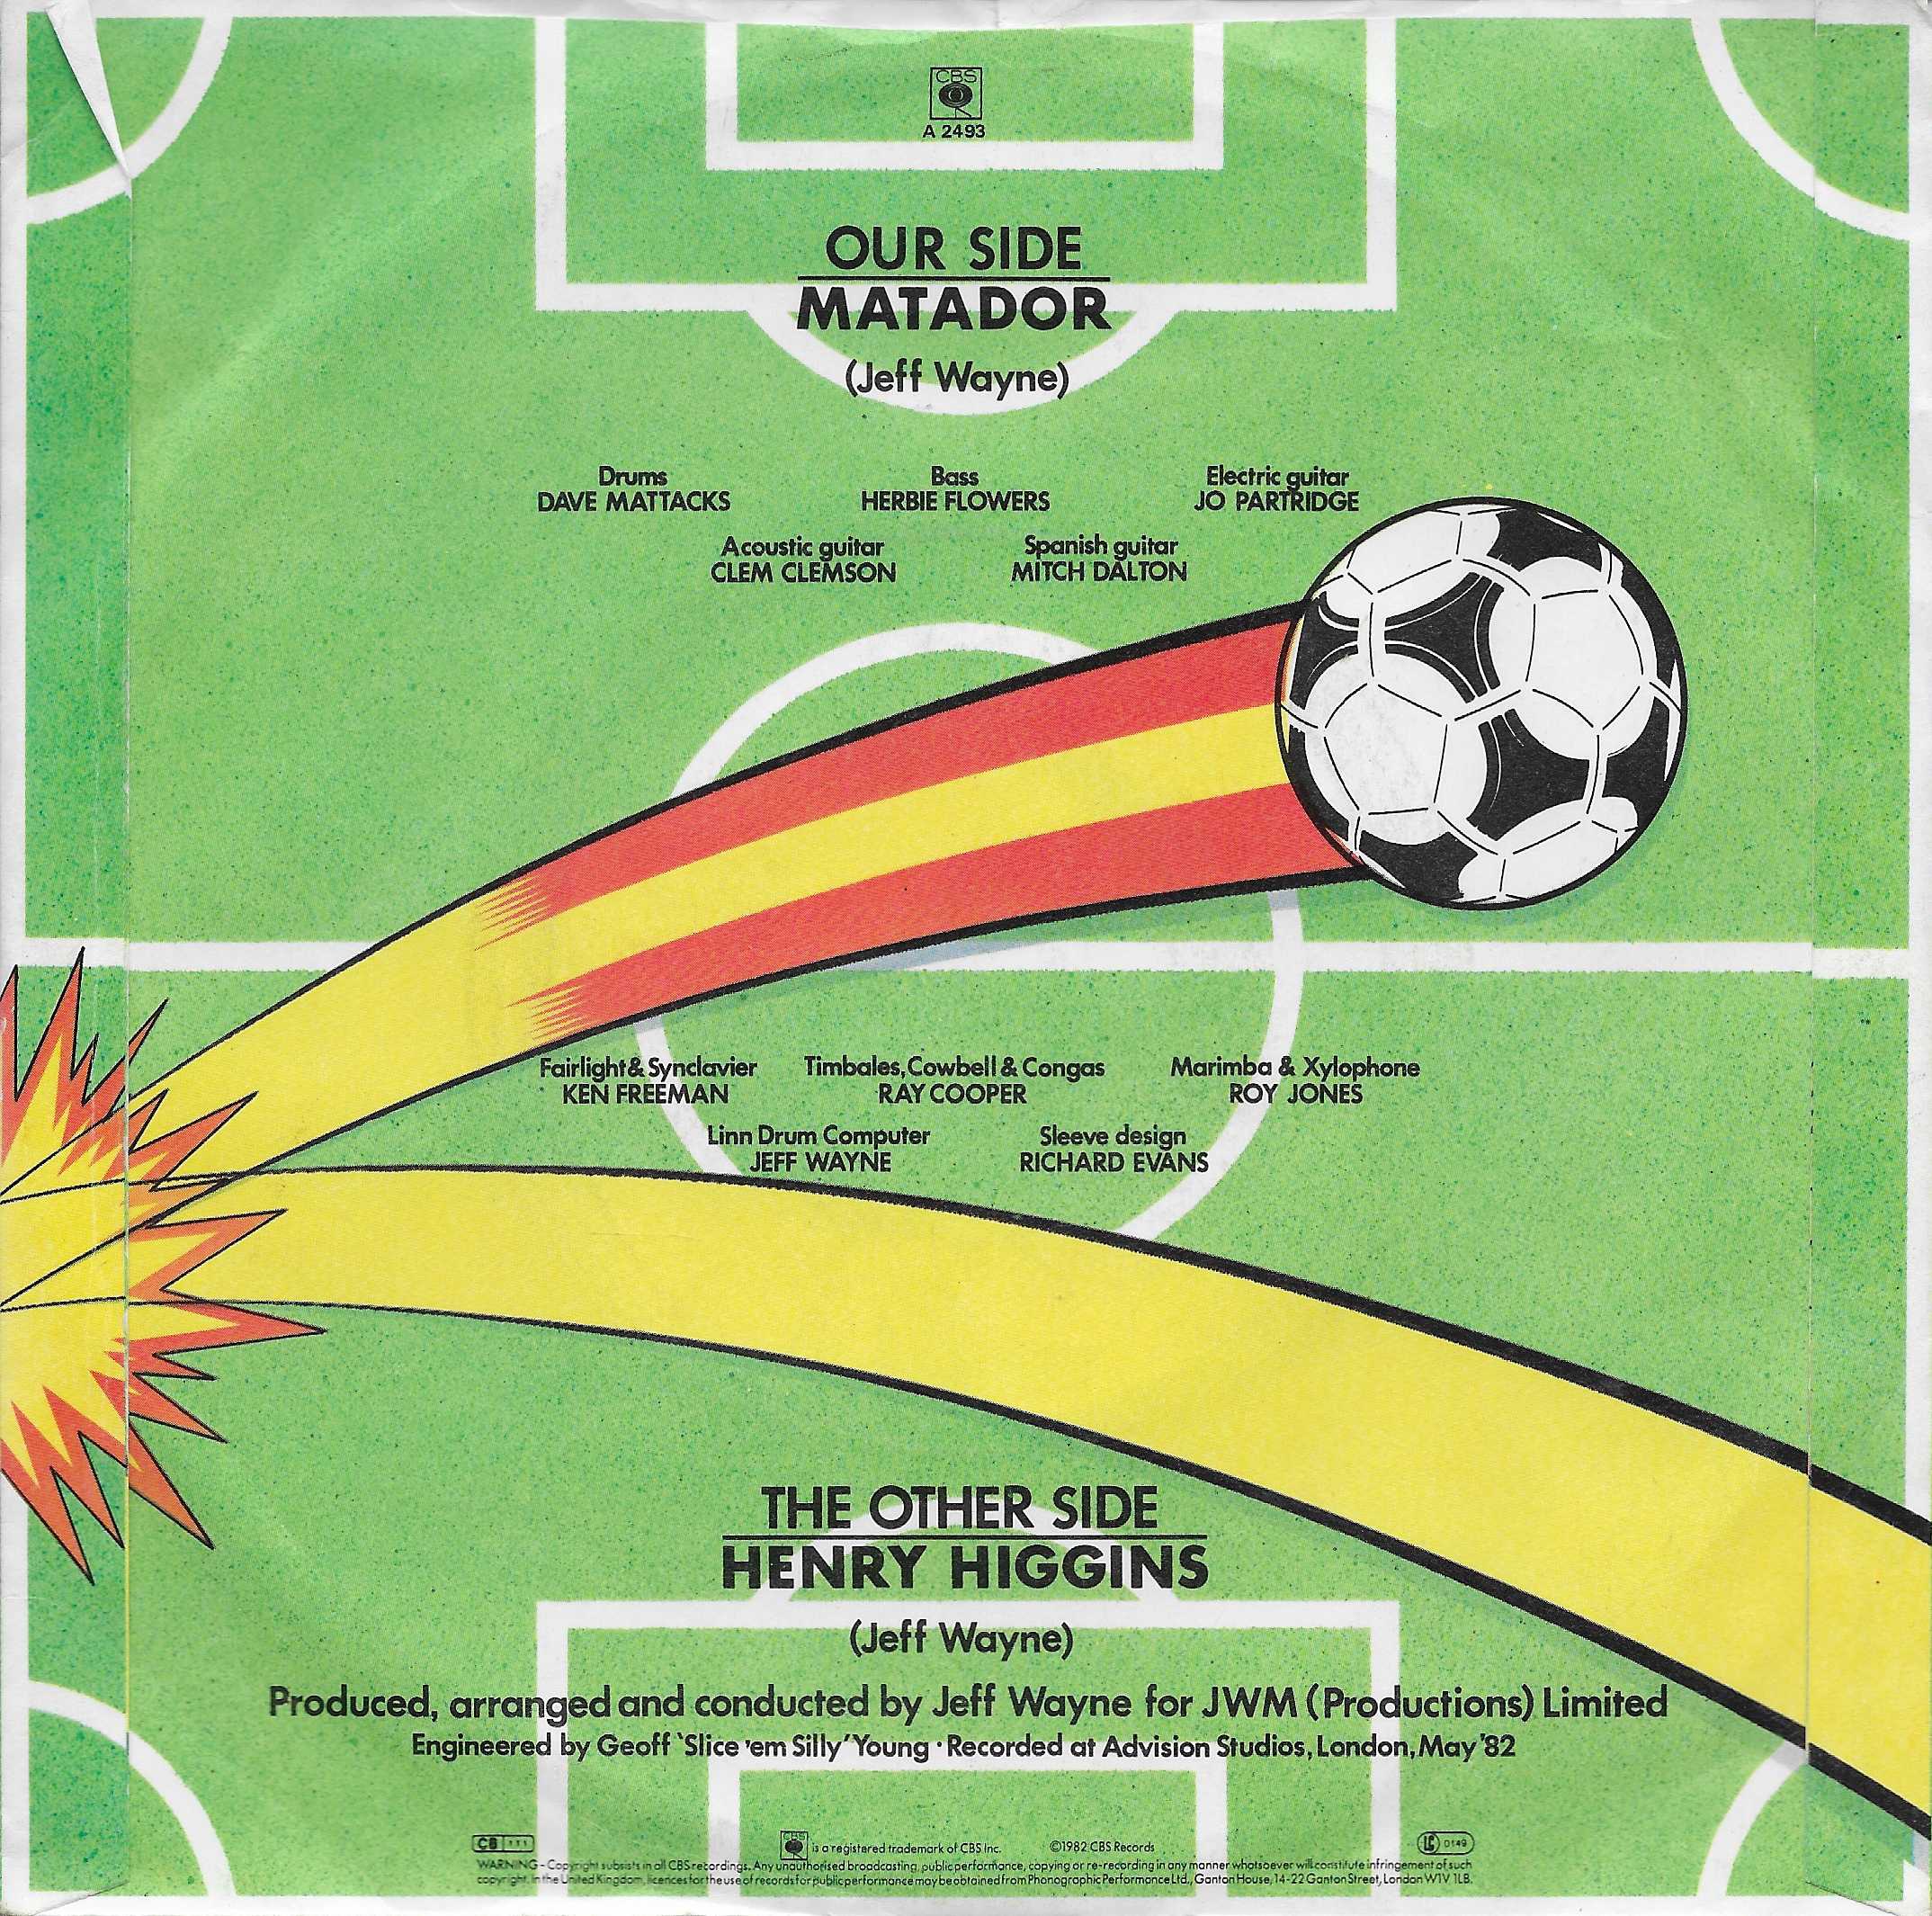 Picture of A 2493 Matador (ITV World Cup theme (1982)) by artist Jeff Wayne from ITV, Channel 4 and Channel 5 library